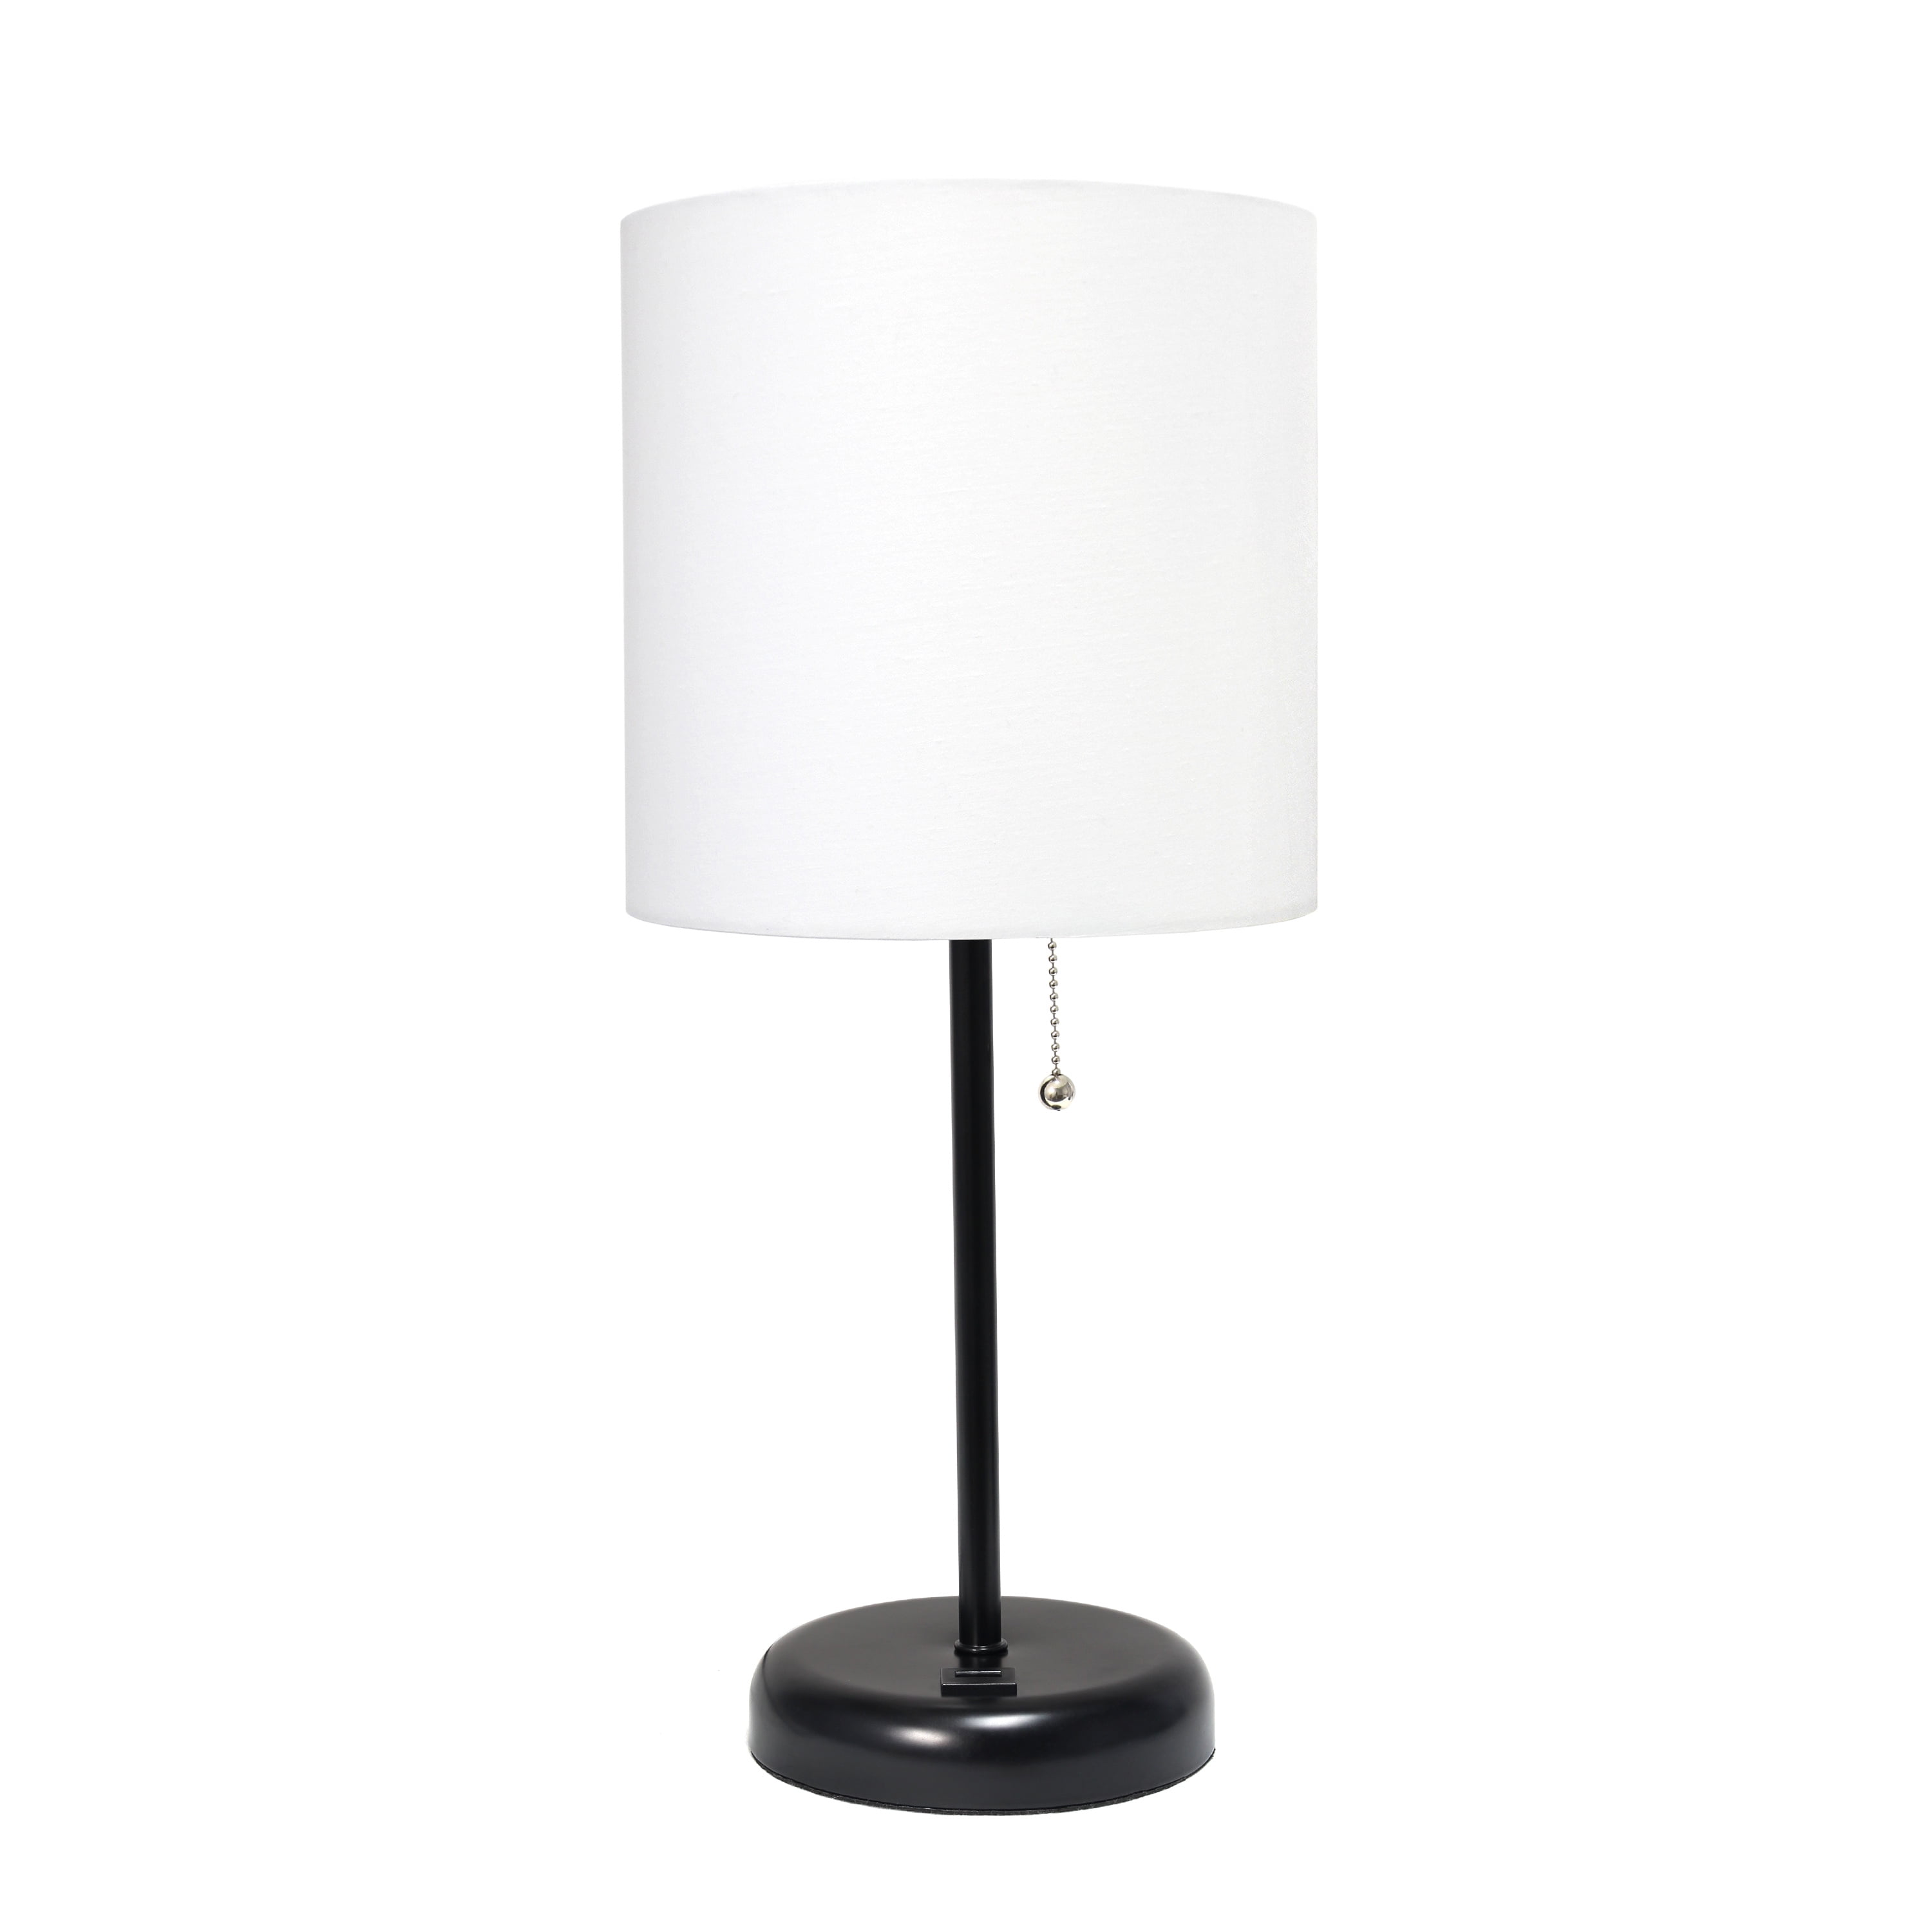 Lt2044-baw Black Stick Table Lamp With Usb Charging Port & Fabric Shade, White